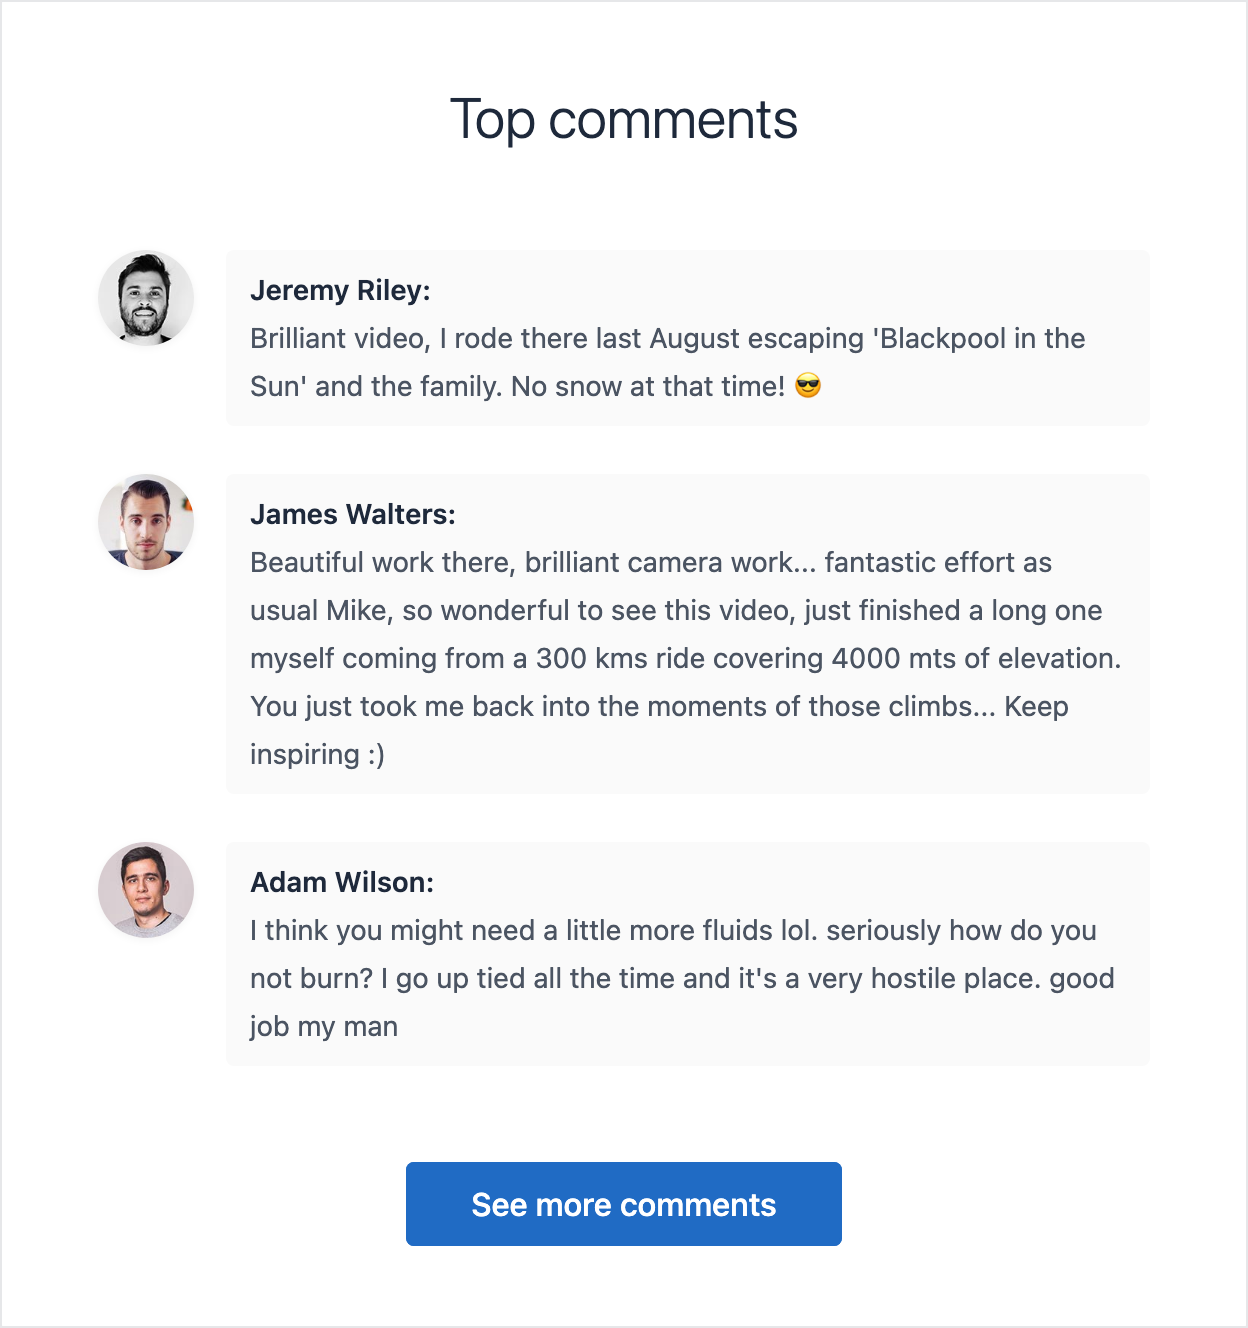 Email template with the top comments